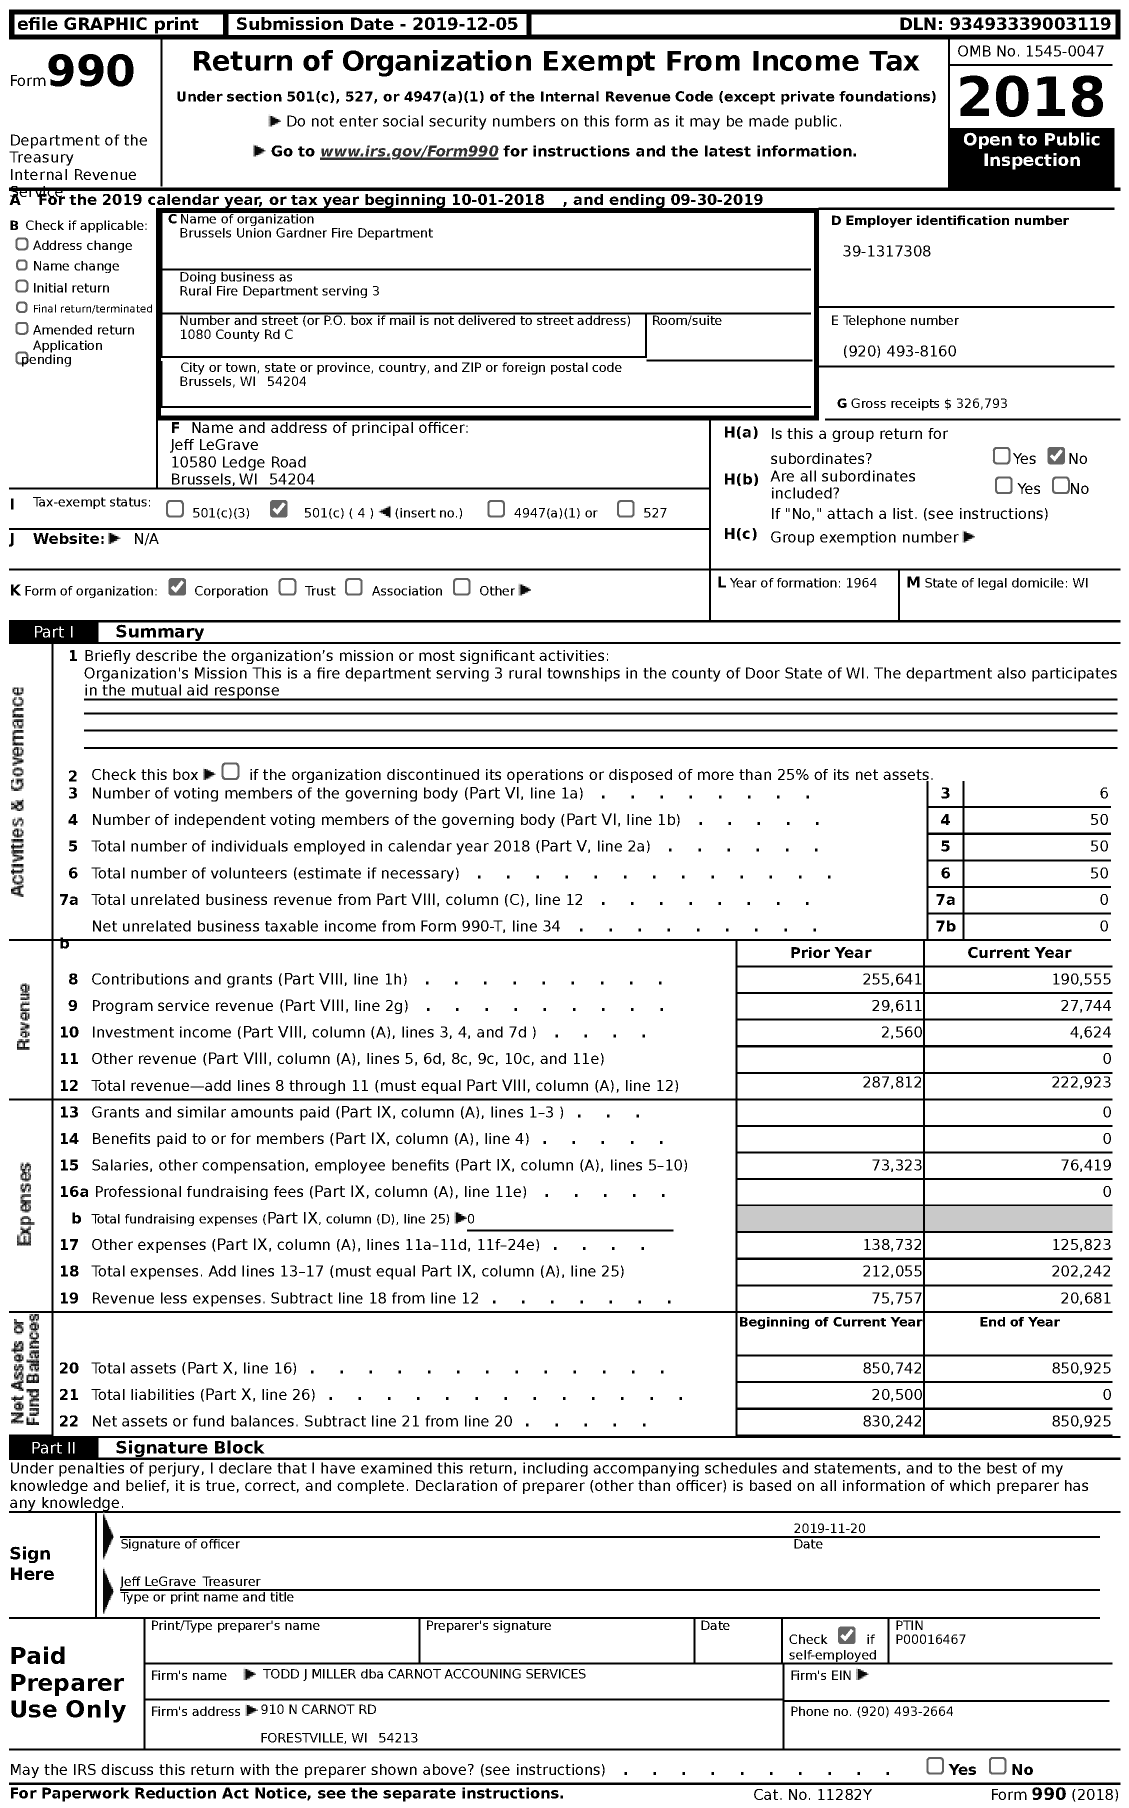 Image of first page of 2018 Form 990 for Rural Fire Department serving 3